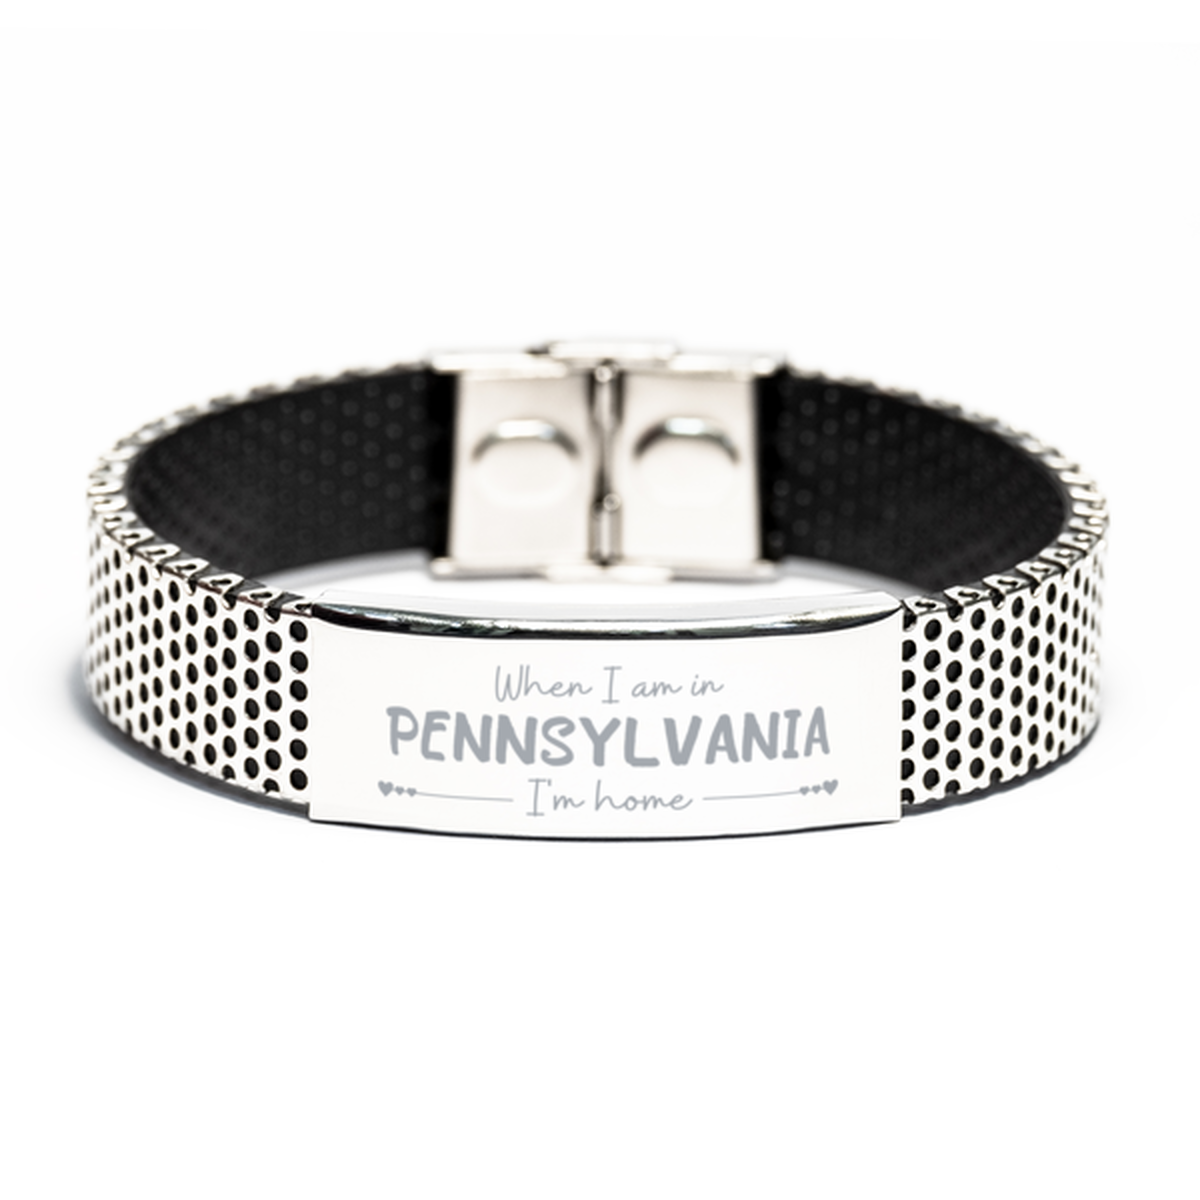 When I am in Pennsylvania I'm home Stainless Steel Bracelet, Cheap Gifts For Pennsylvania, State Pennsylvania Birthday Gifts for Friends Coworker